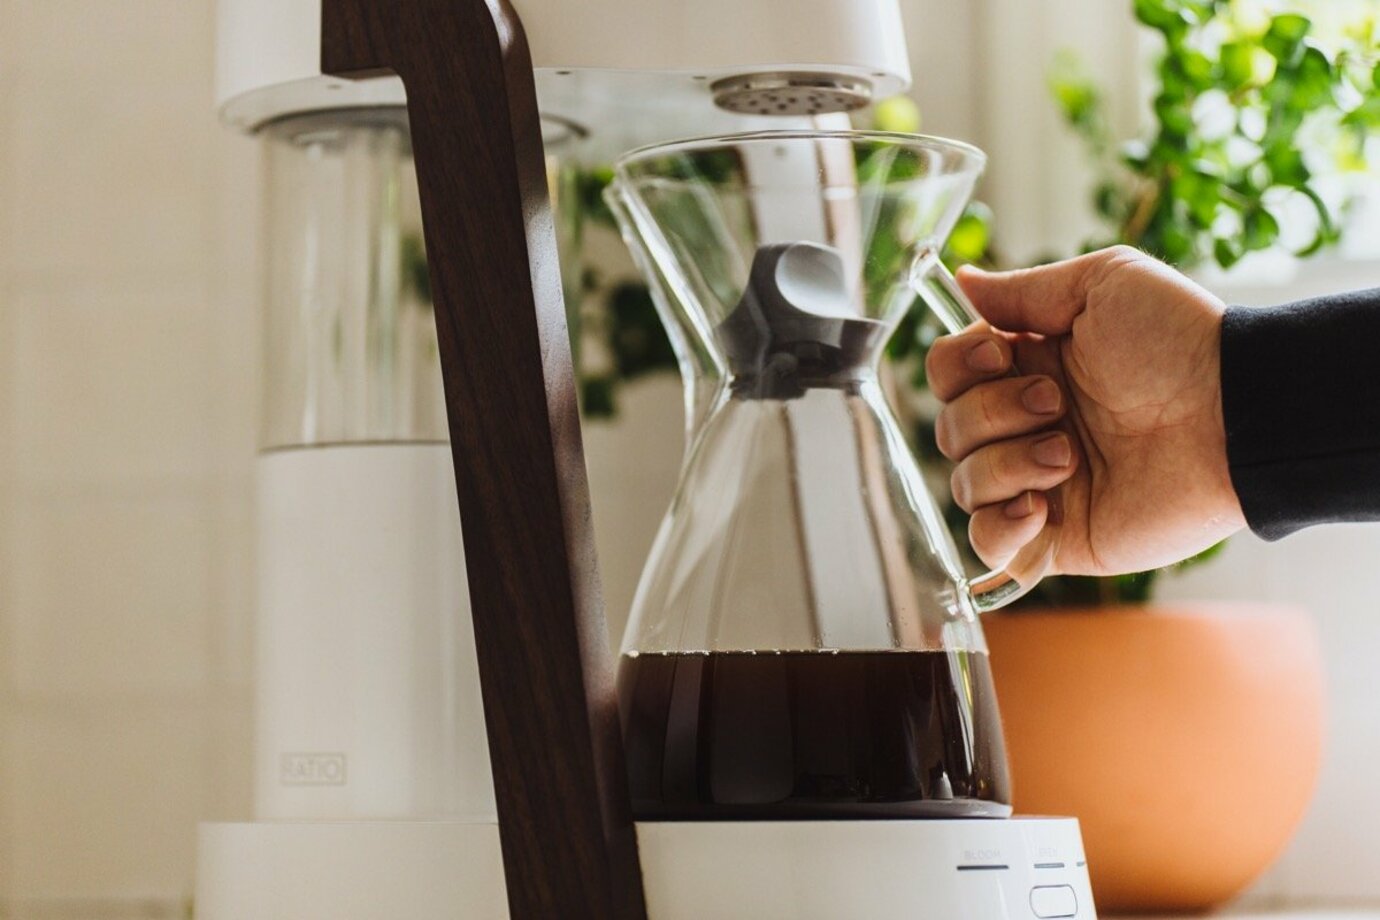 Ratio Eight Coffee Maker Review: A Near-Perfect Chemex-Style Pot